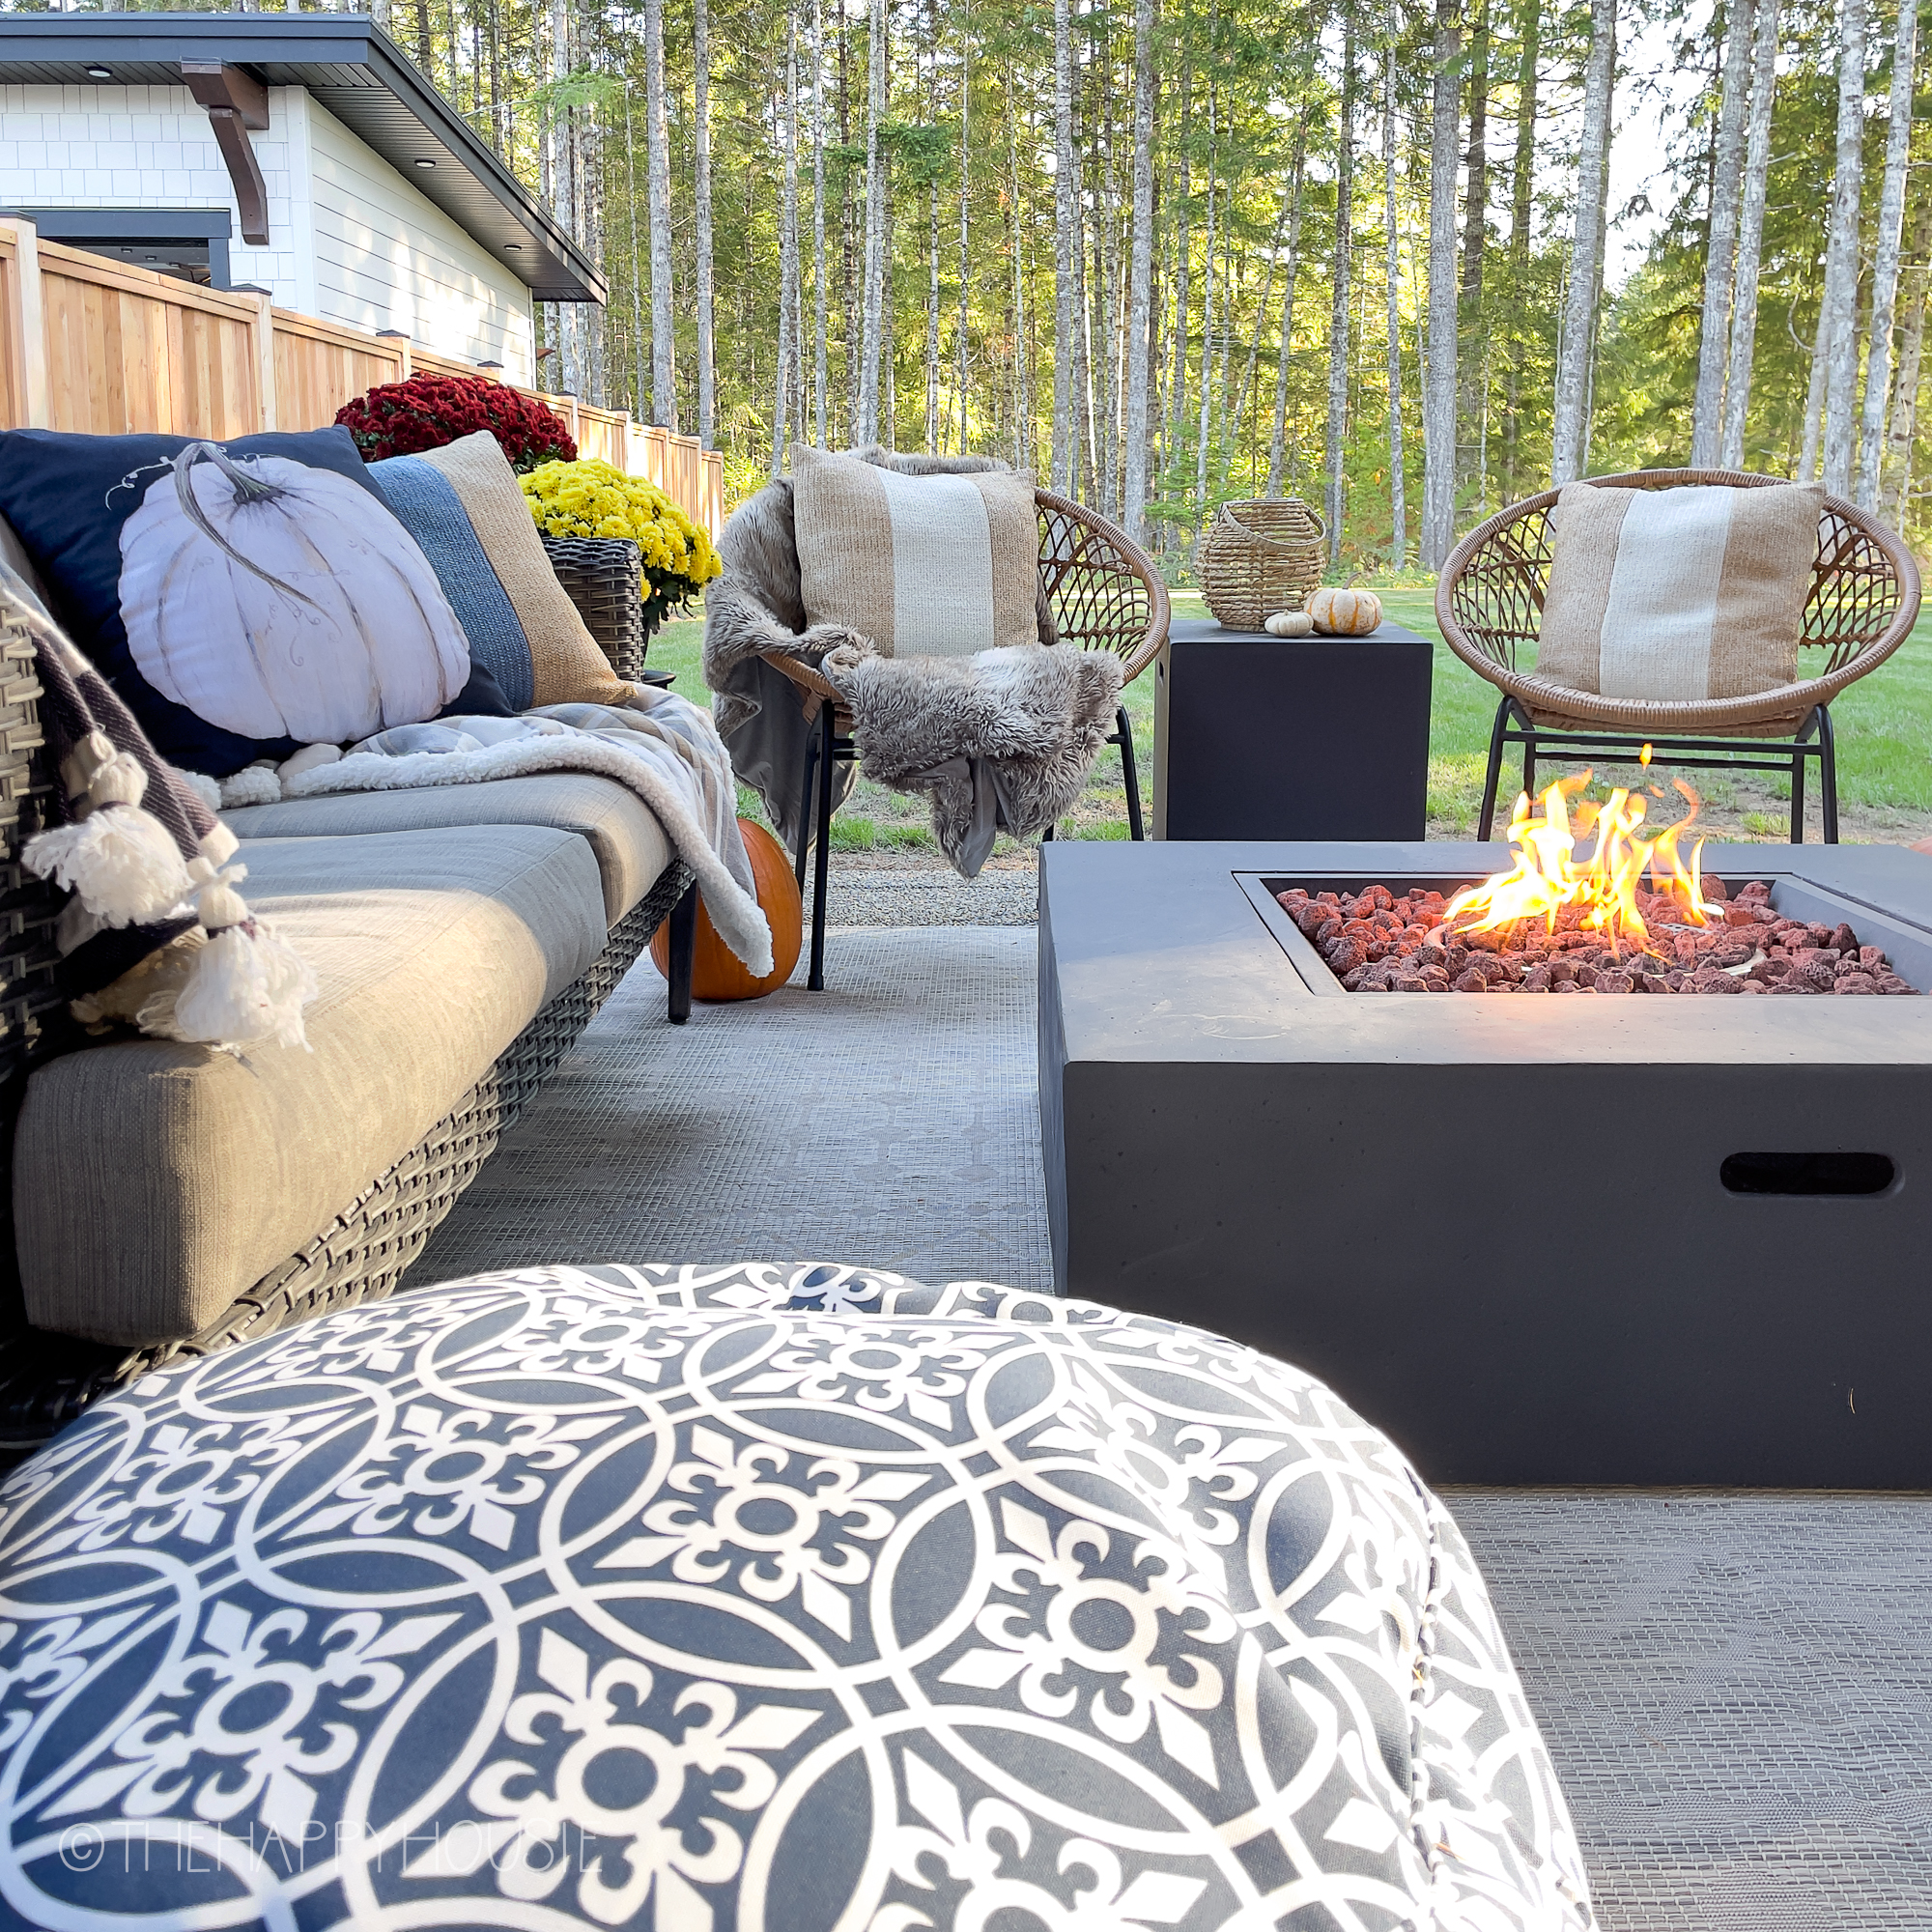 A small couch is by the outdoor fireplace.